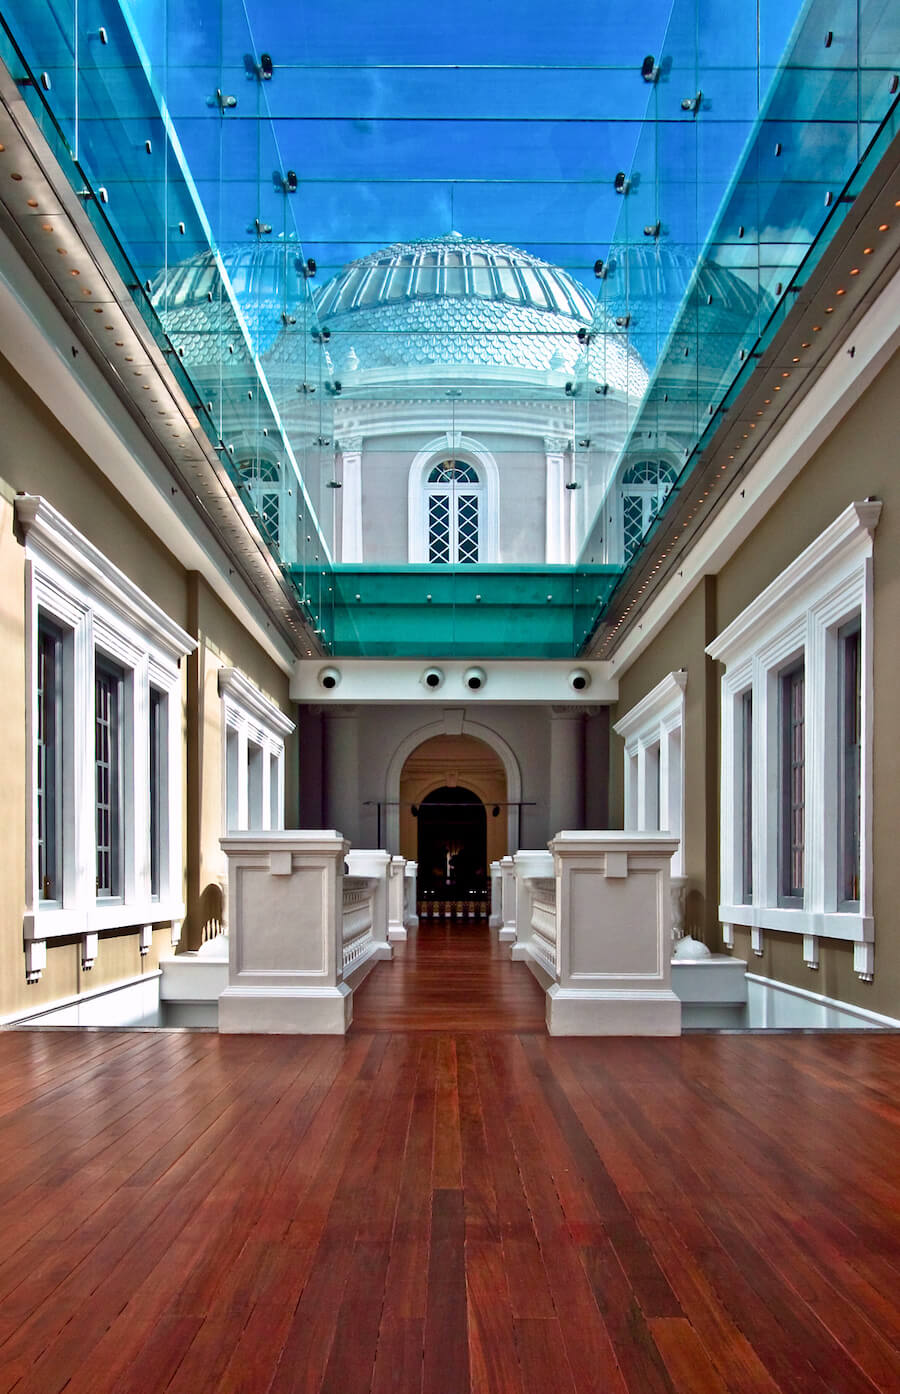 A passageway in the National Museum of Singapore. Source: someformofhuman